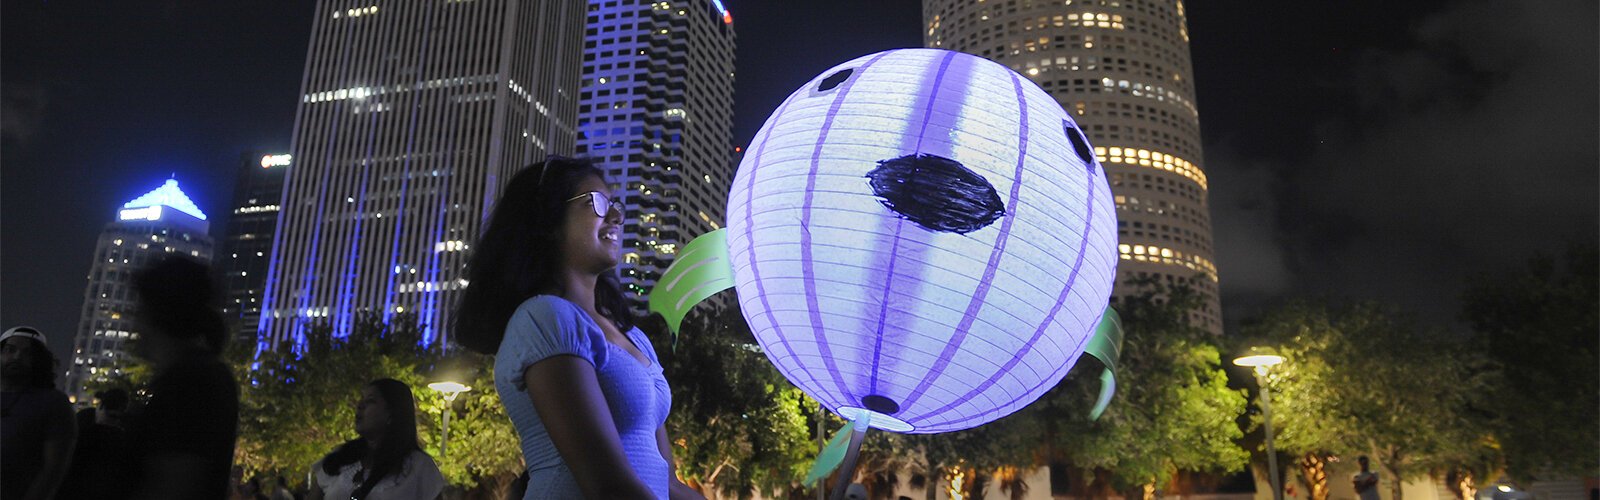 Bhavya Bansal, 15, holds her lantern after arriving with her family at Curtis Hixon Park during the Lantern Parade Saturday night.